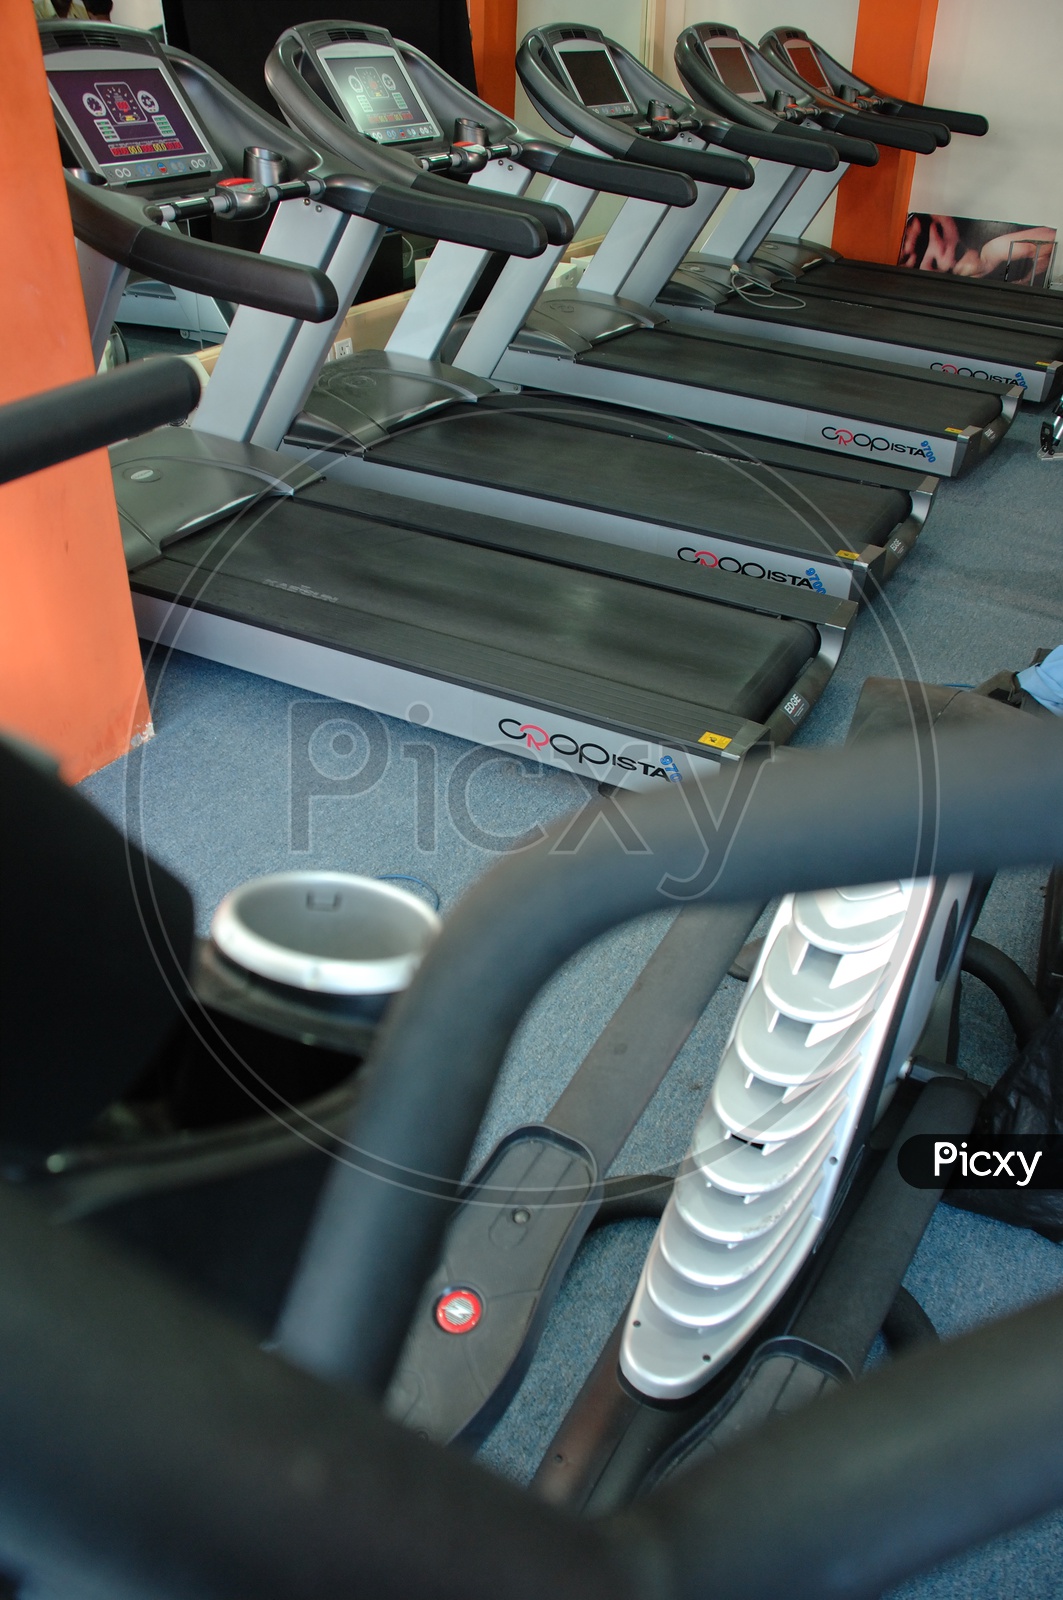 Fitness and strengthening equipment in the gym - Treadmills